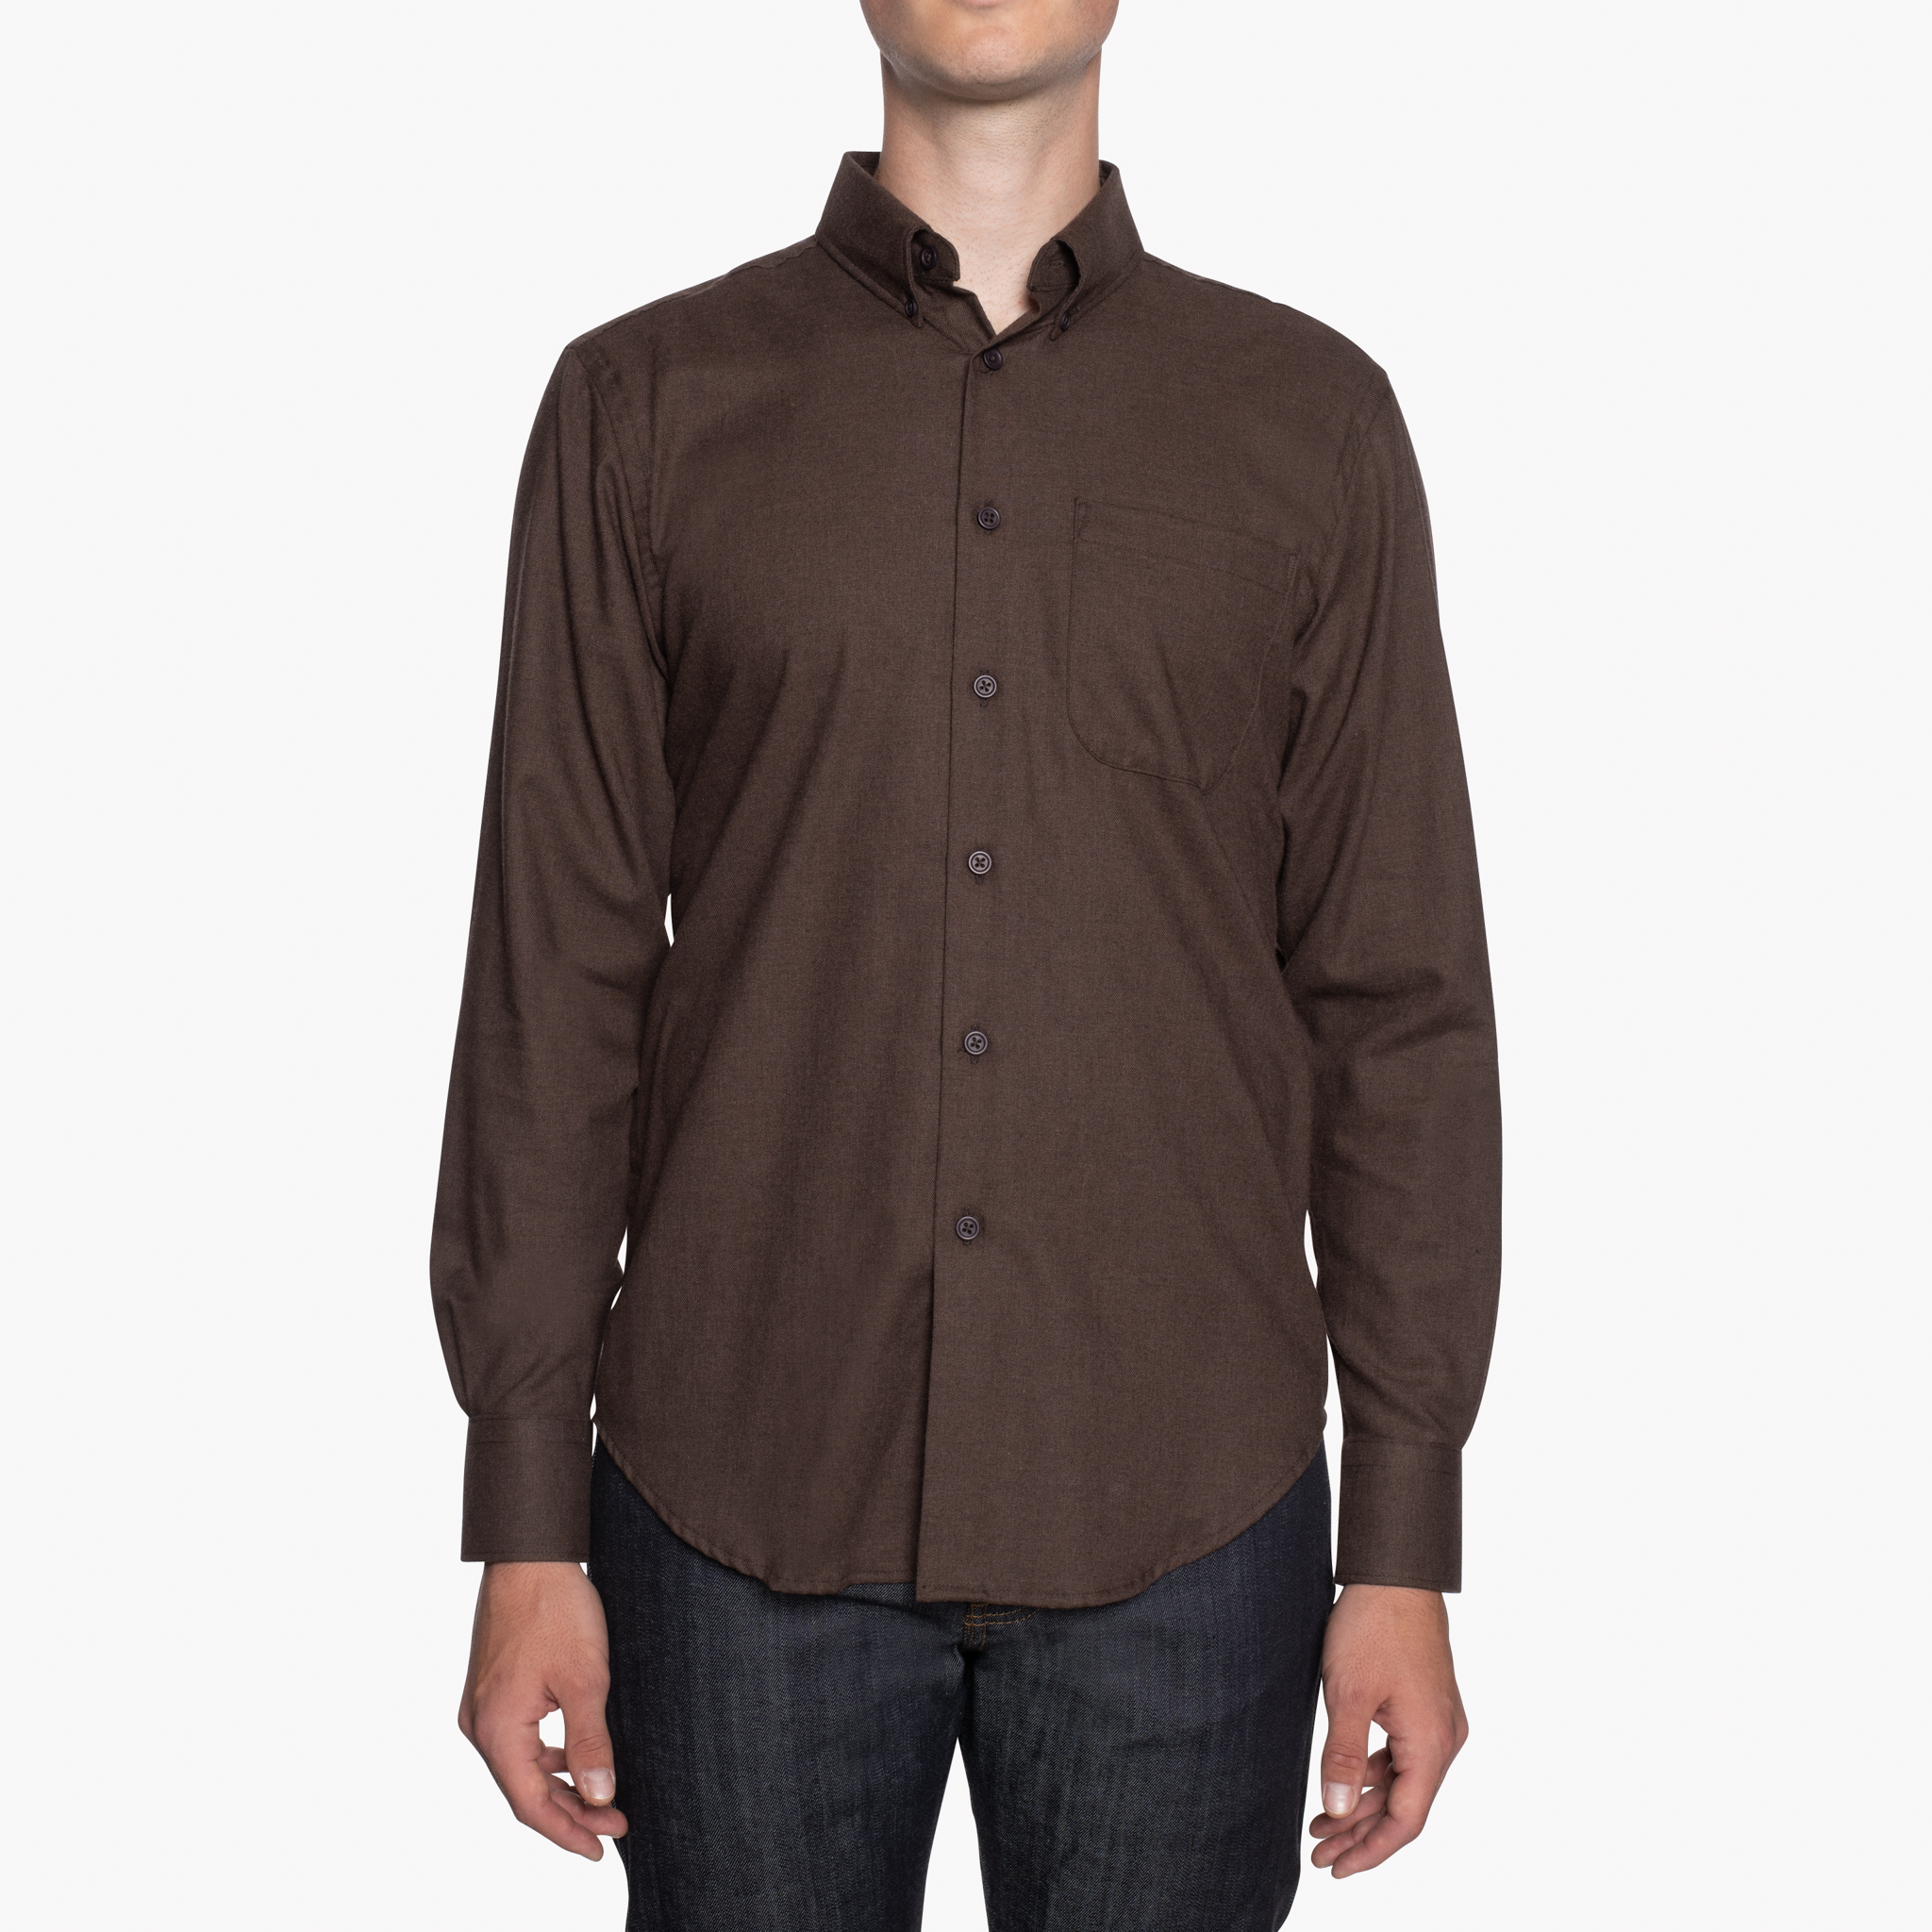  Easy Shirt - Soft Twill - Brown - front 